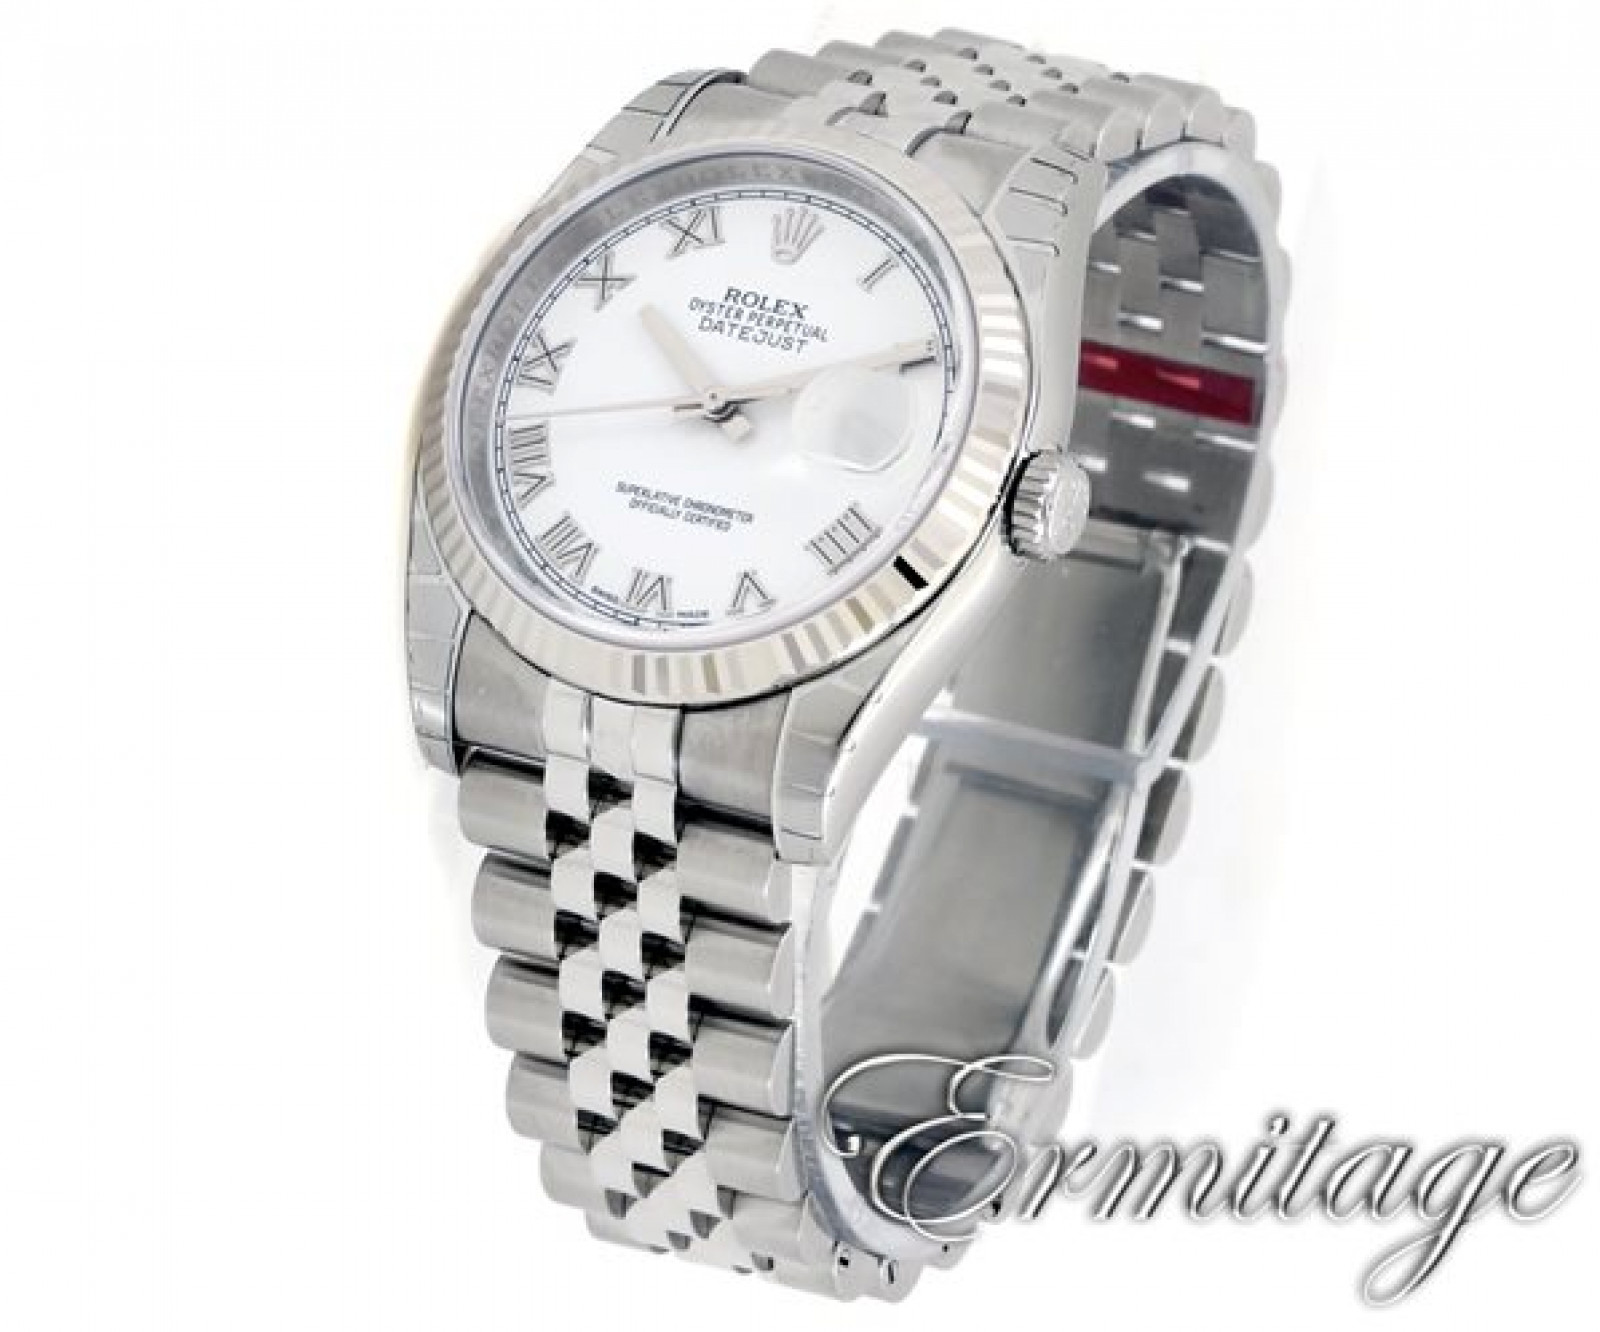 Rolex Datejust 16234 Steel with White Dial